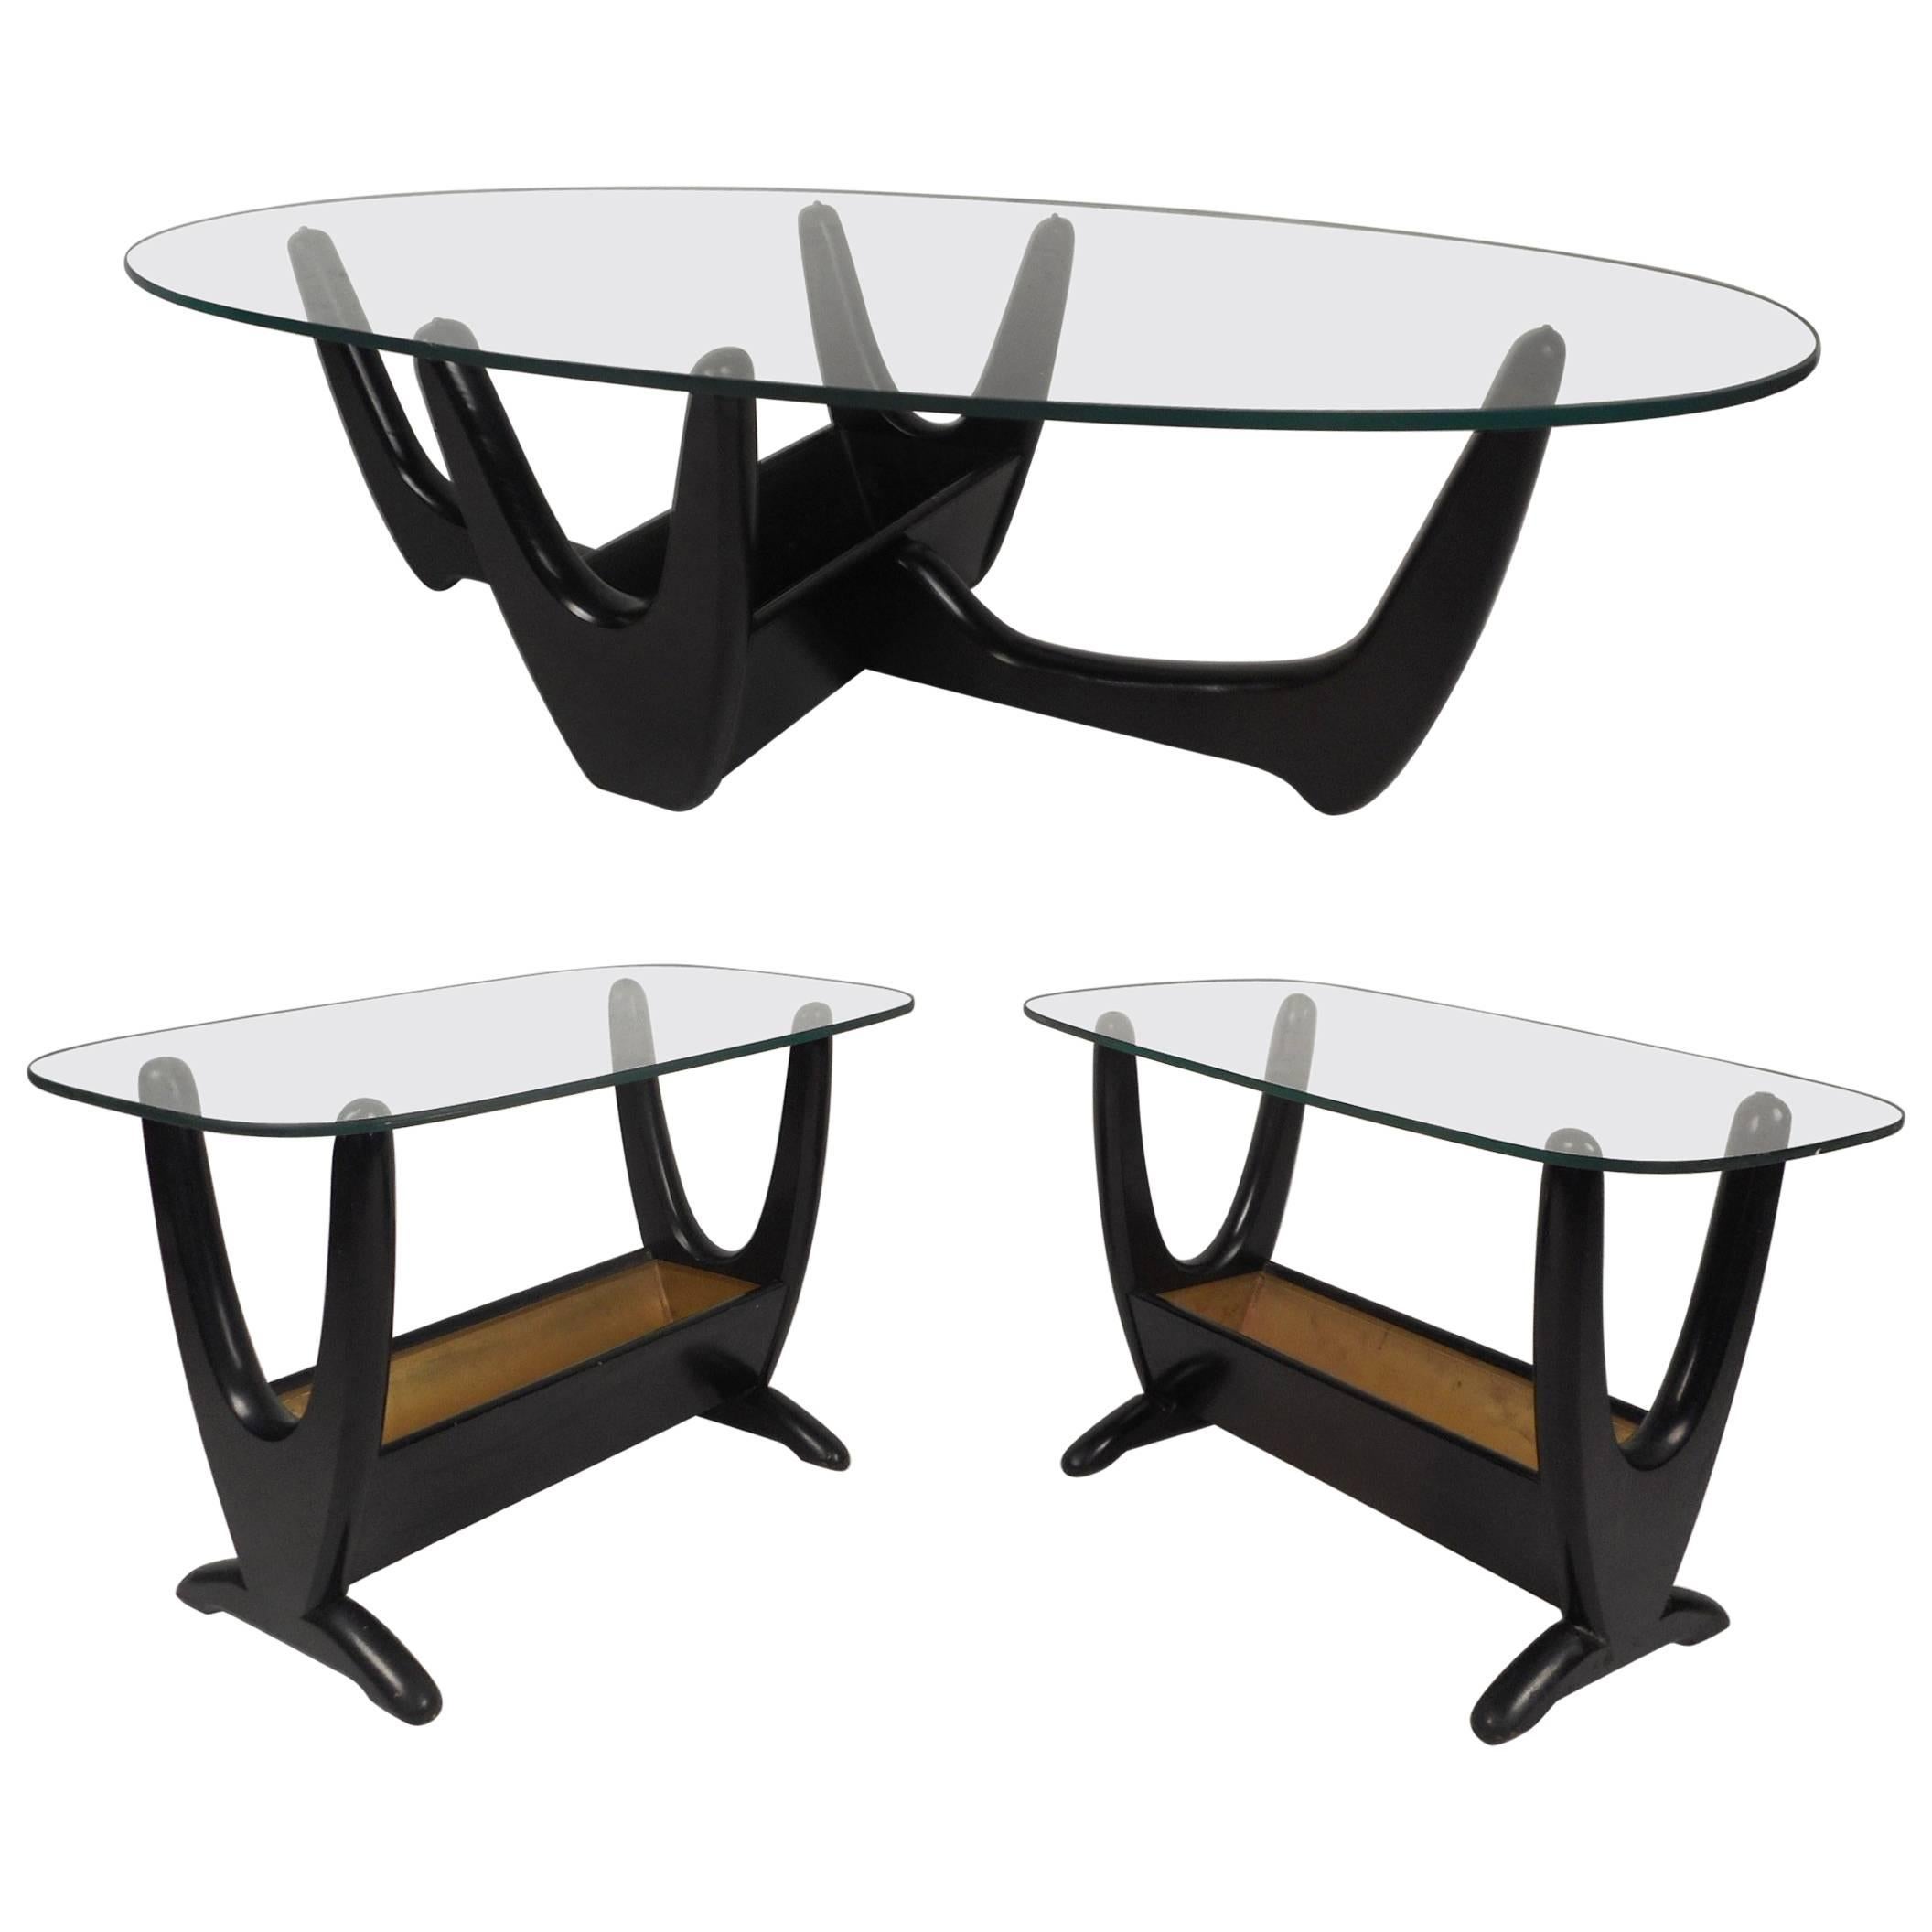 Set of Mid-Century Modern Glass Top Tables by Tonk Manufacturing Co. 